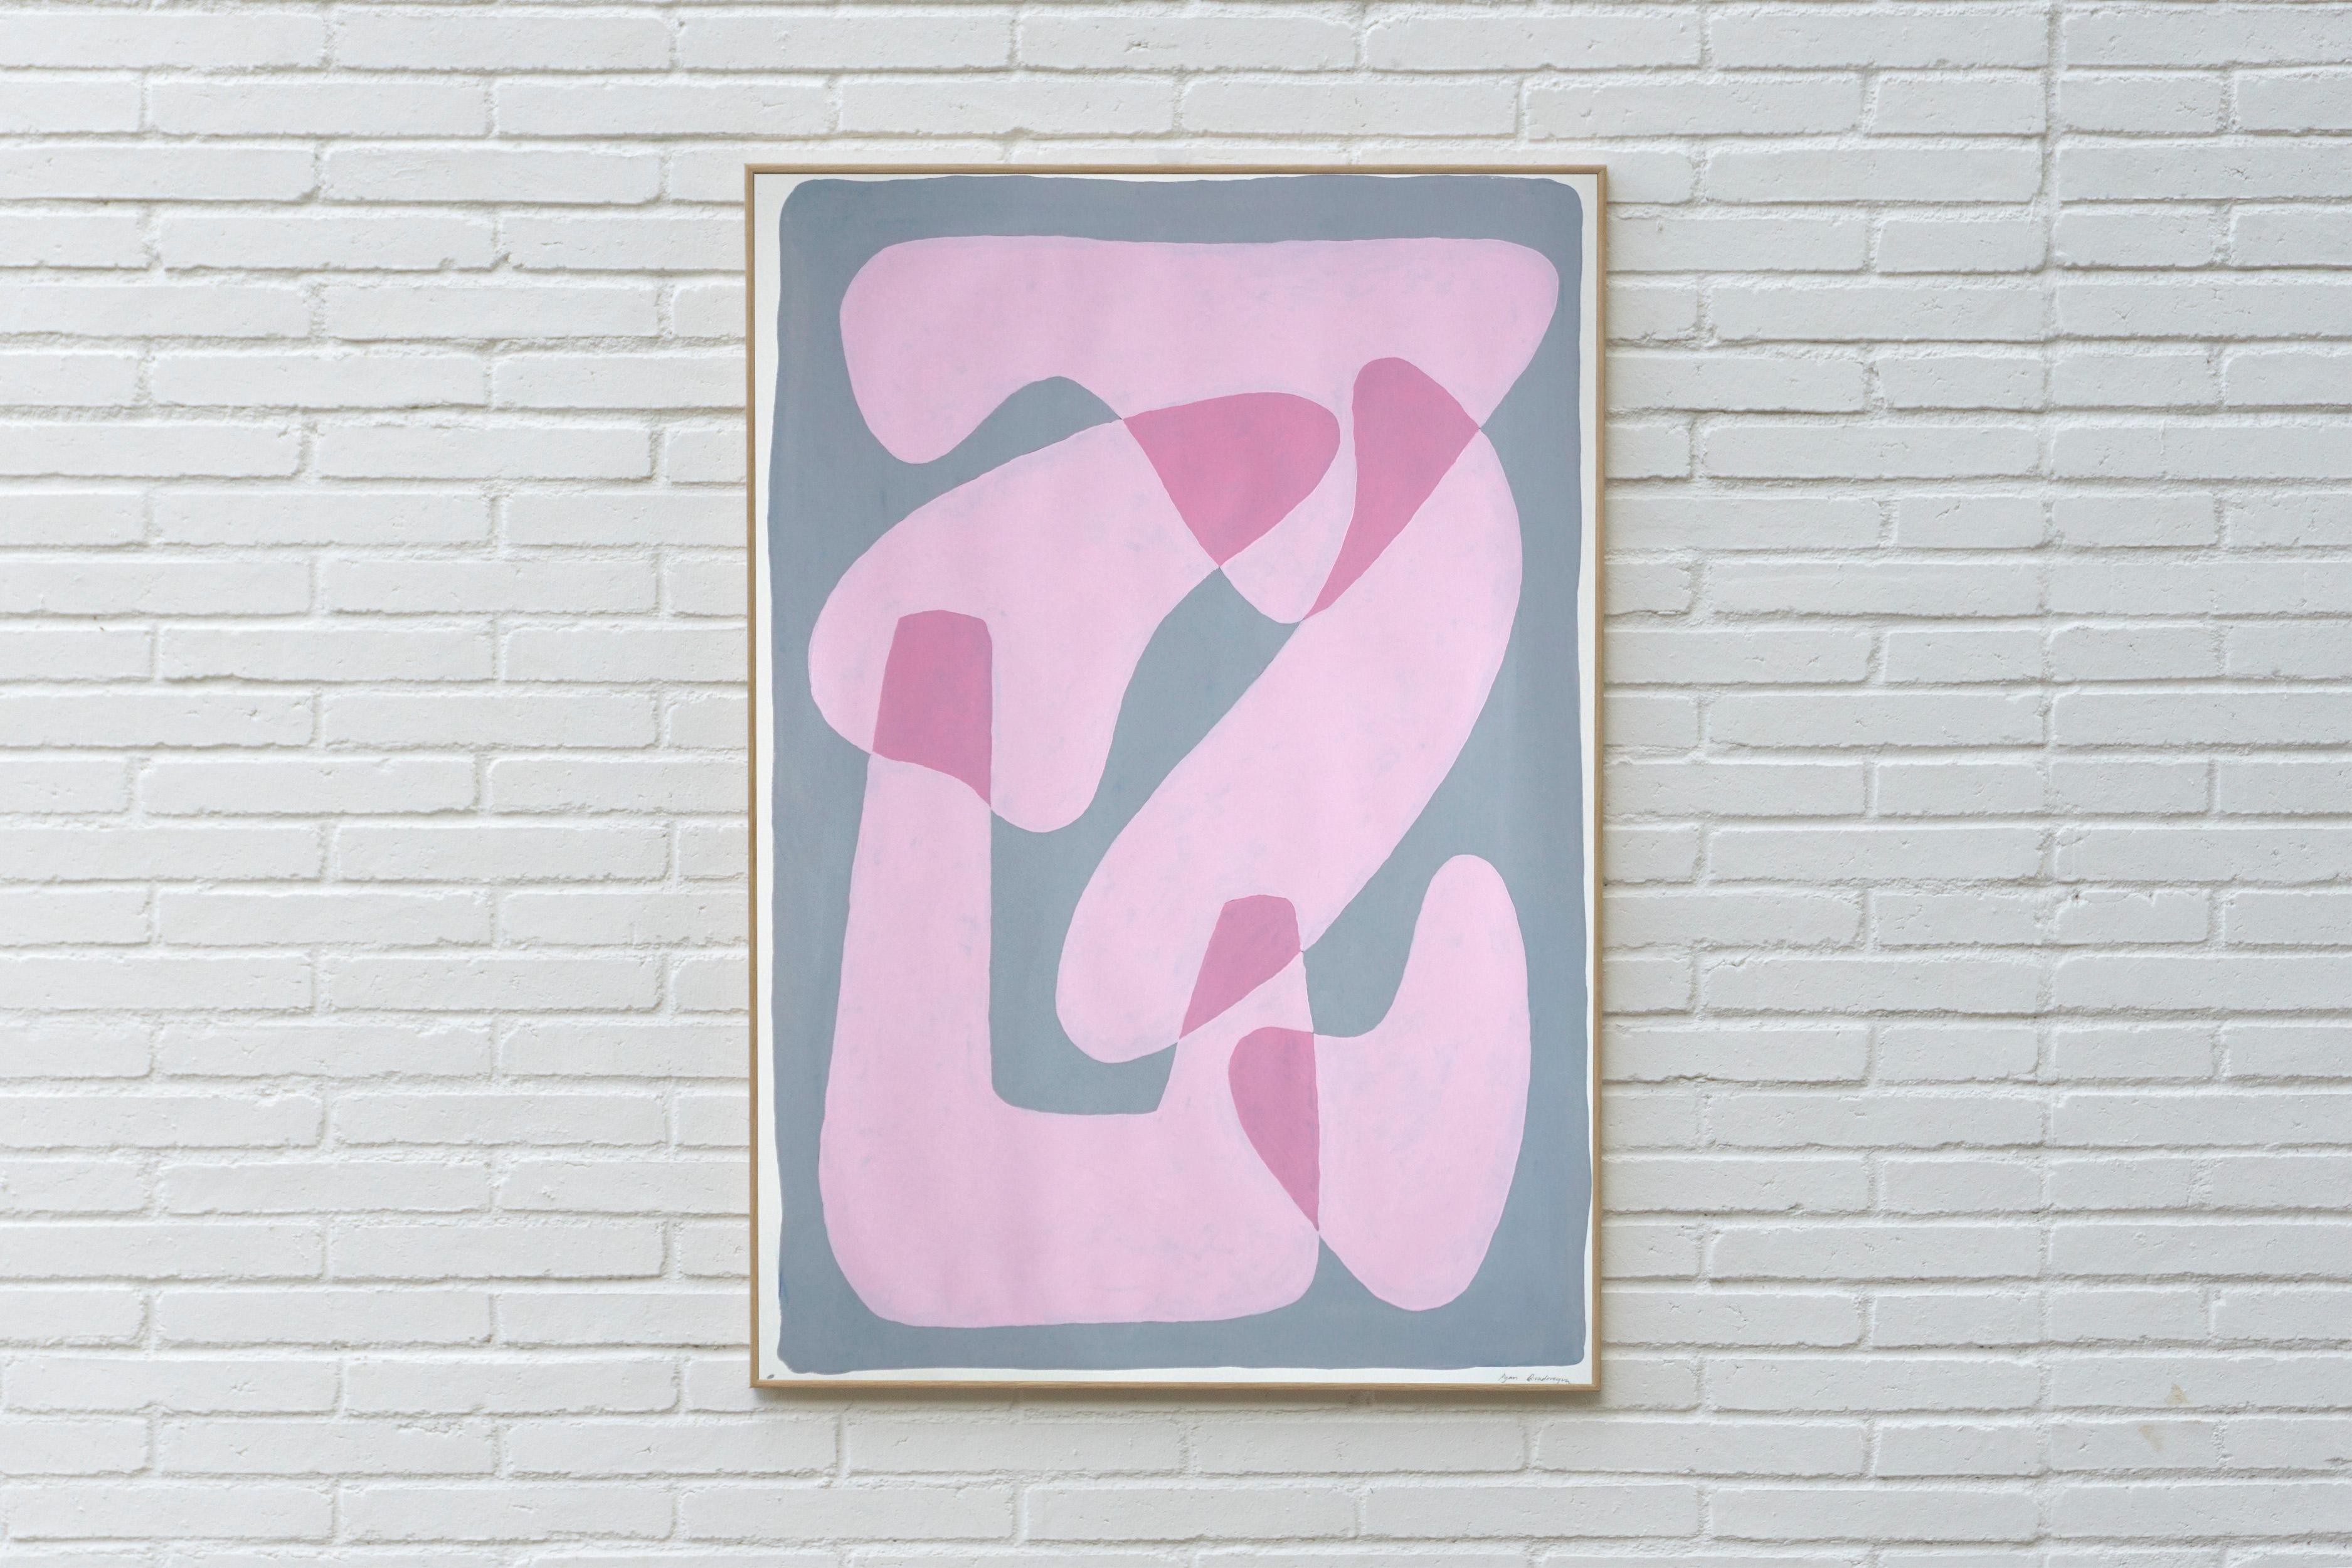 Pastel Pink Figures, Abstract Body Shapes on Gray, Avant-Garde Style on Paper - Painting by Ryan Rivadeneyra